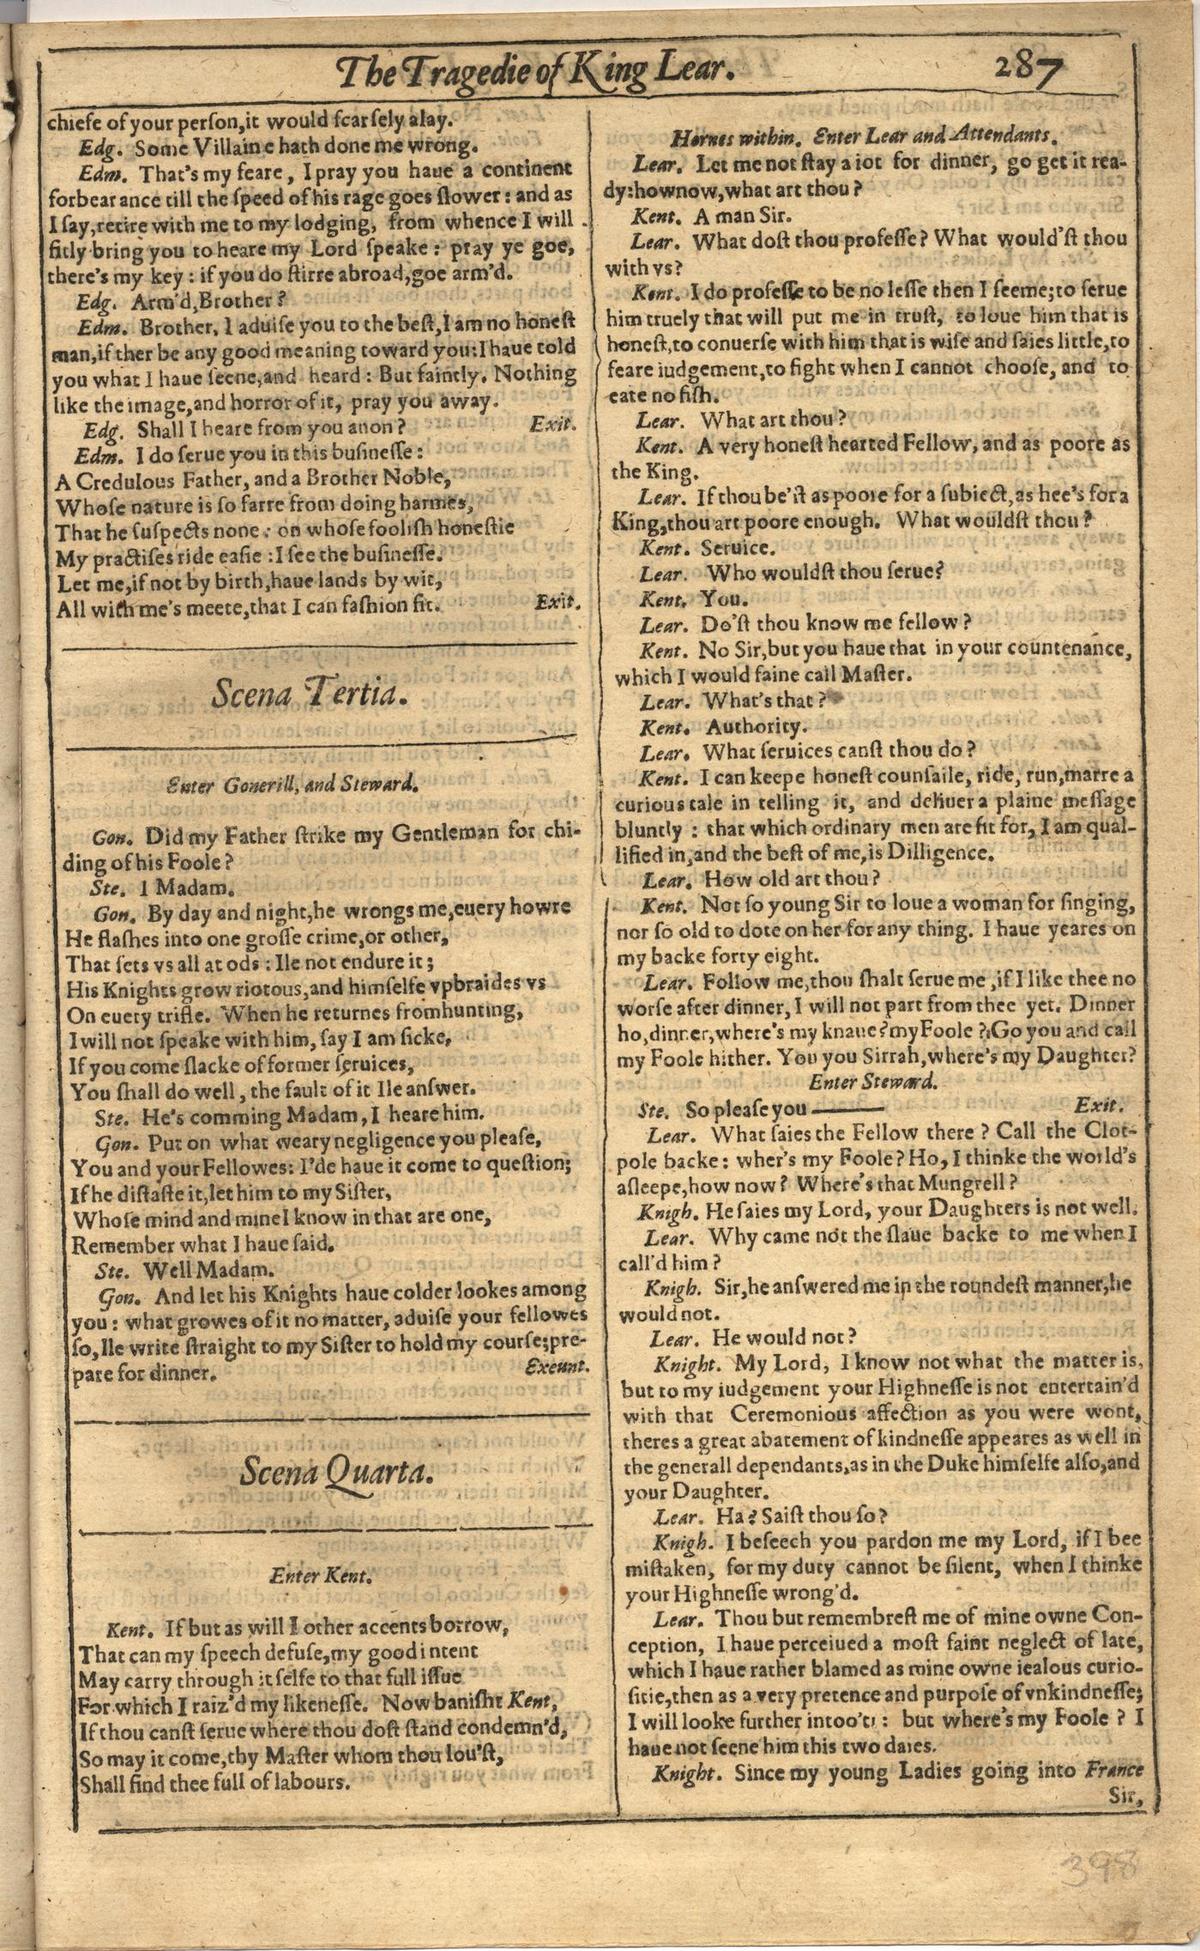 Image of page 795